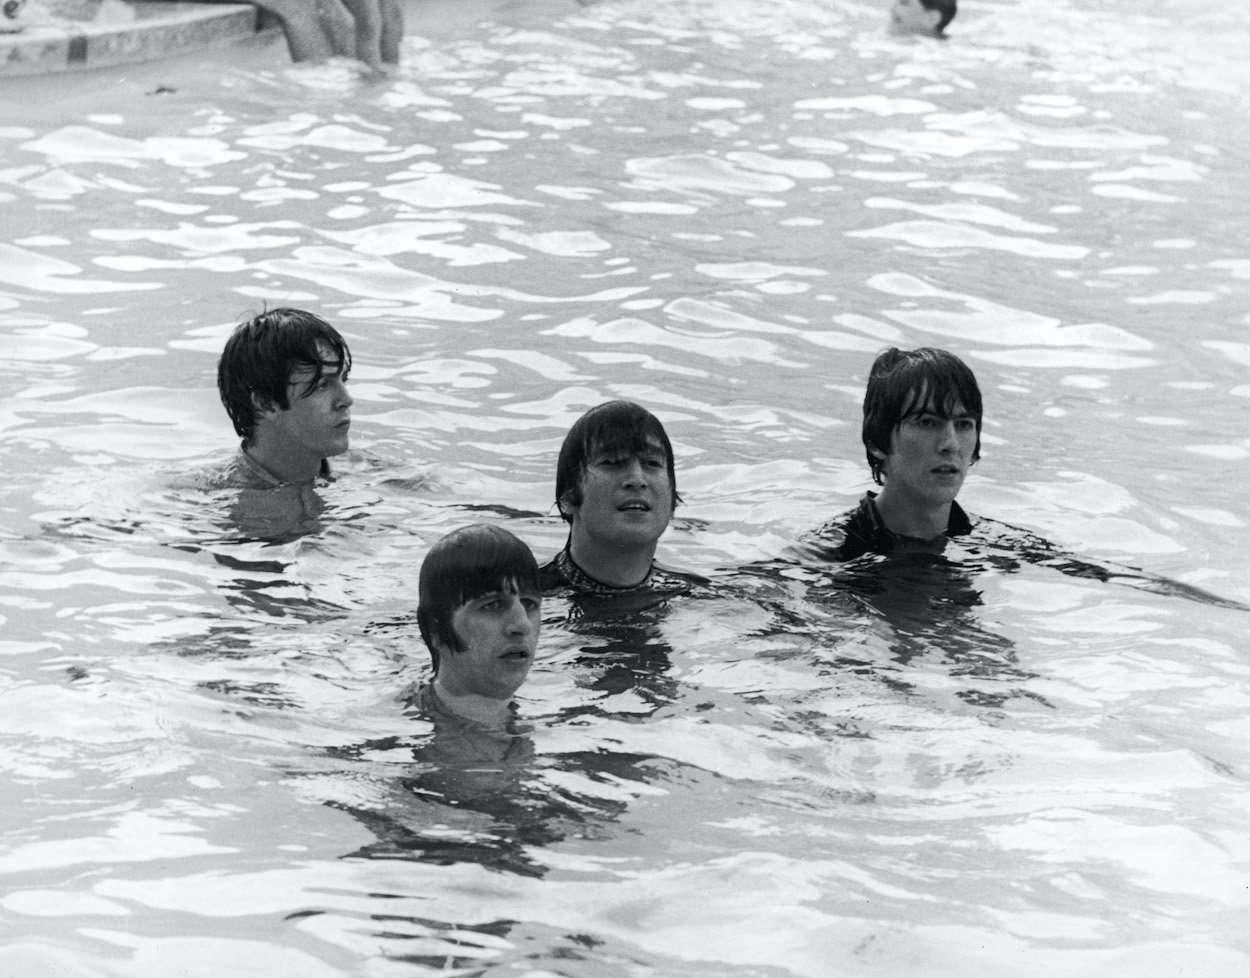 Paul McCartney (from left), Ringo Starr, John Lennon, and George Harrison of The Beatles swim in a pool while filming 'Help' in 1965. The Beatles celebrated hitting No. 1 by asking a colleague to go for a swim.